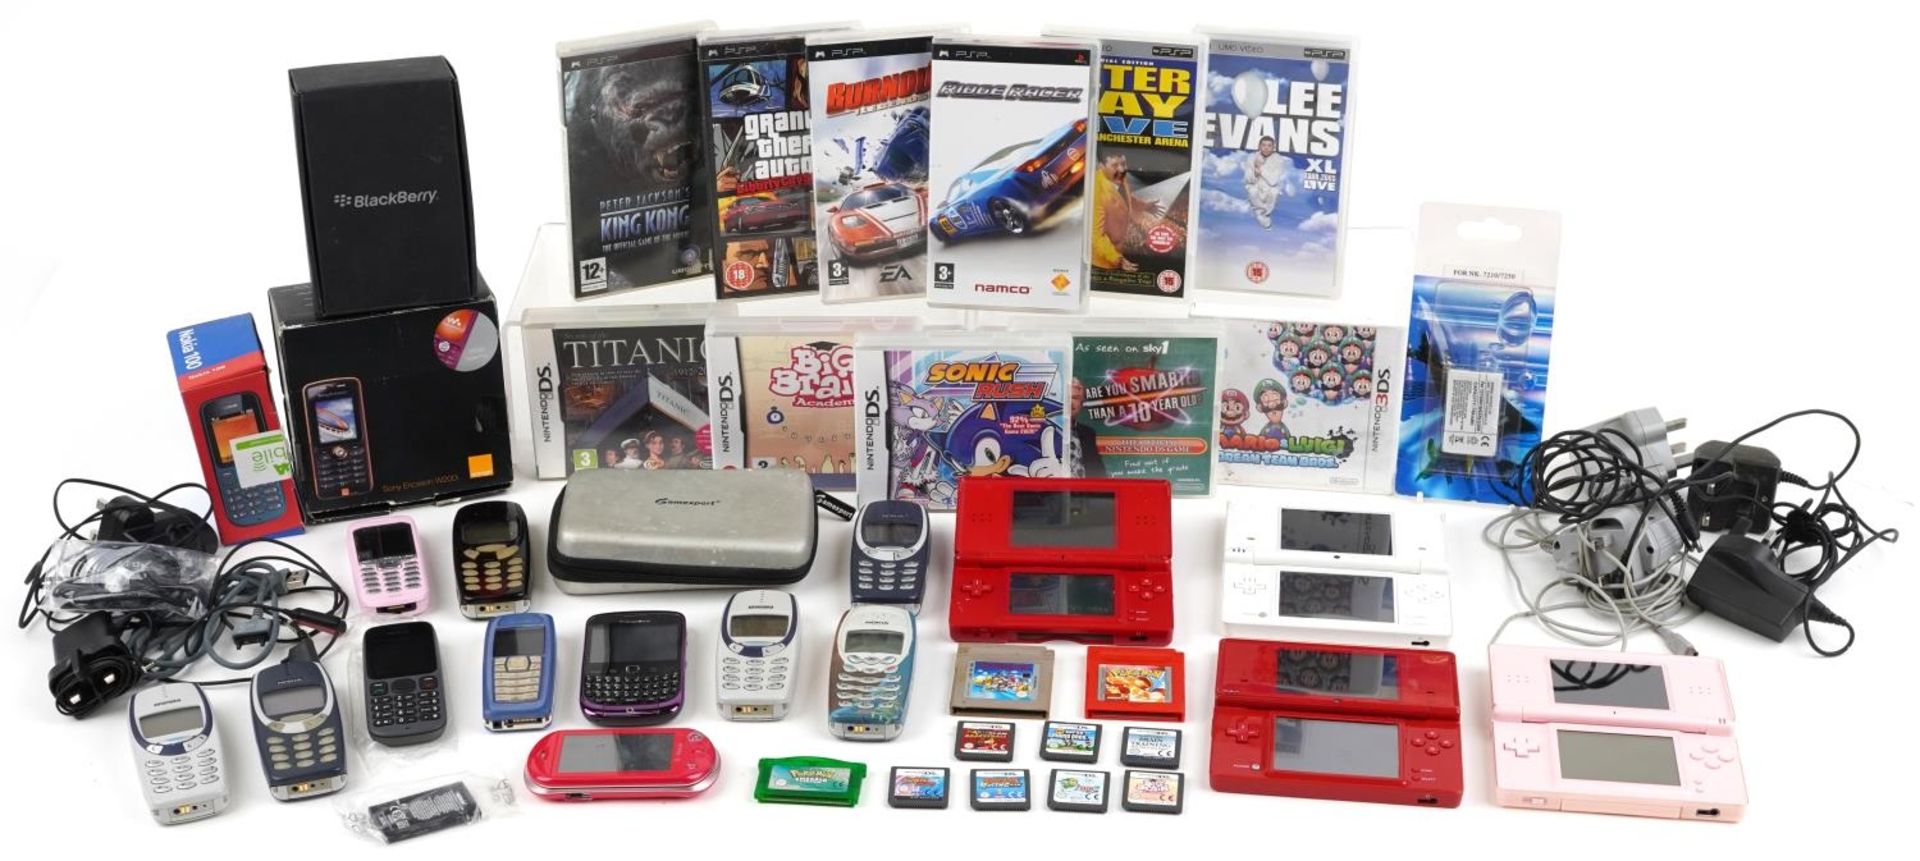 Vintage and later mobile phones and handheld games consoles including Nintendo DS Lite, Nintendo DS,